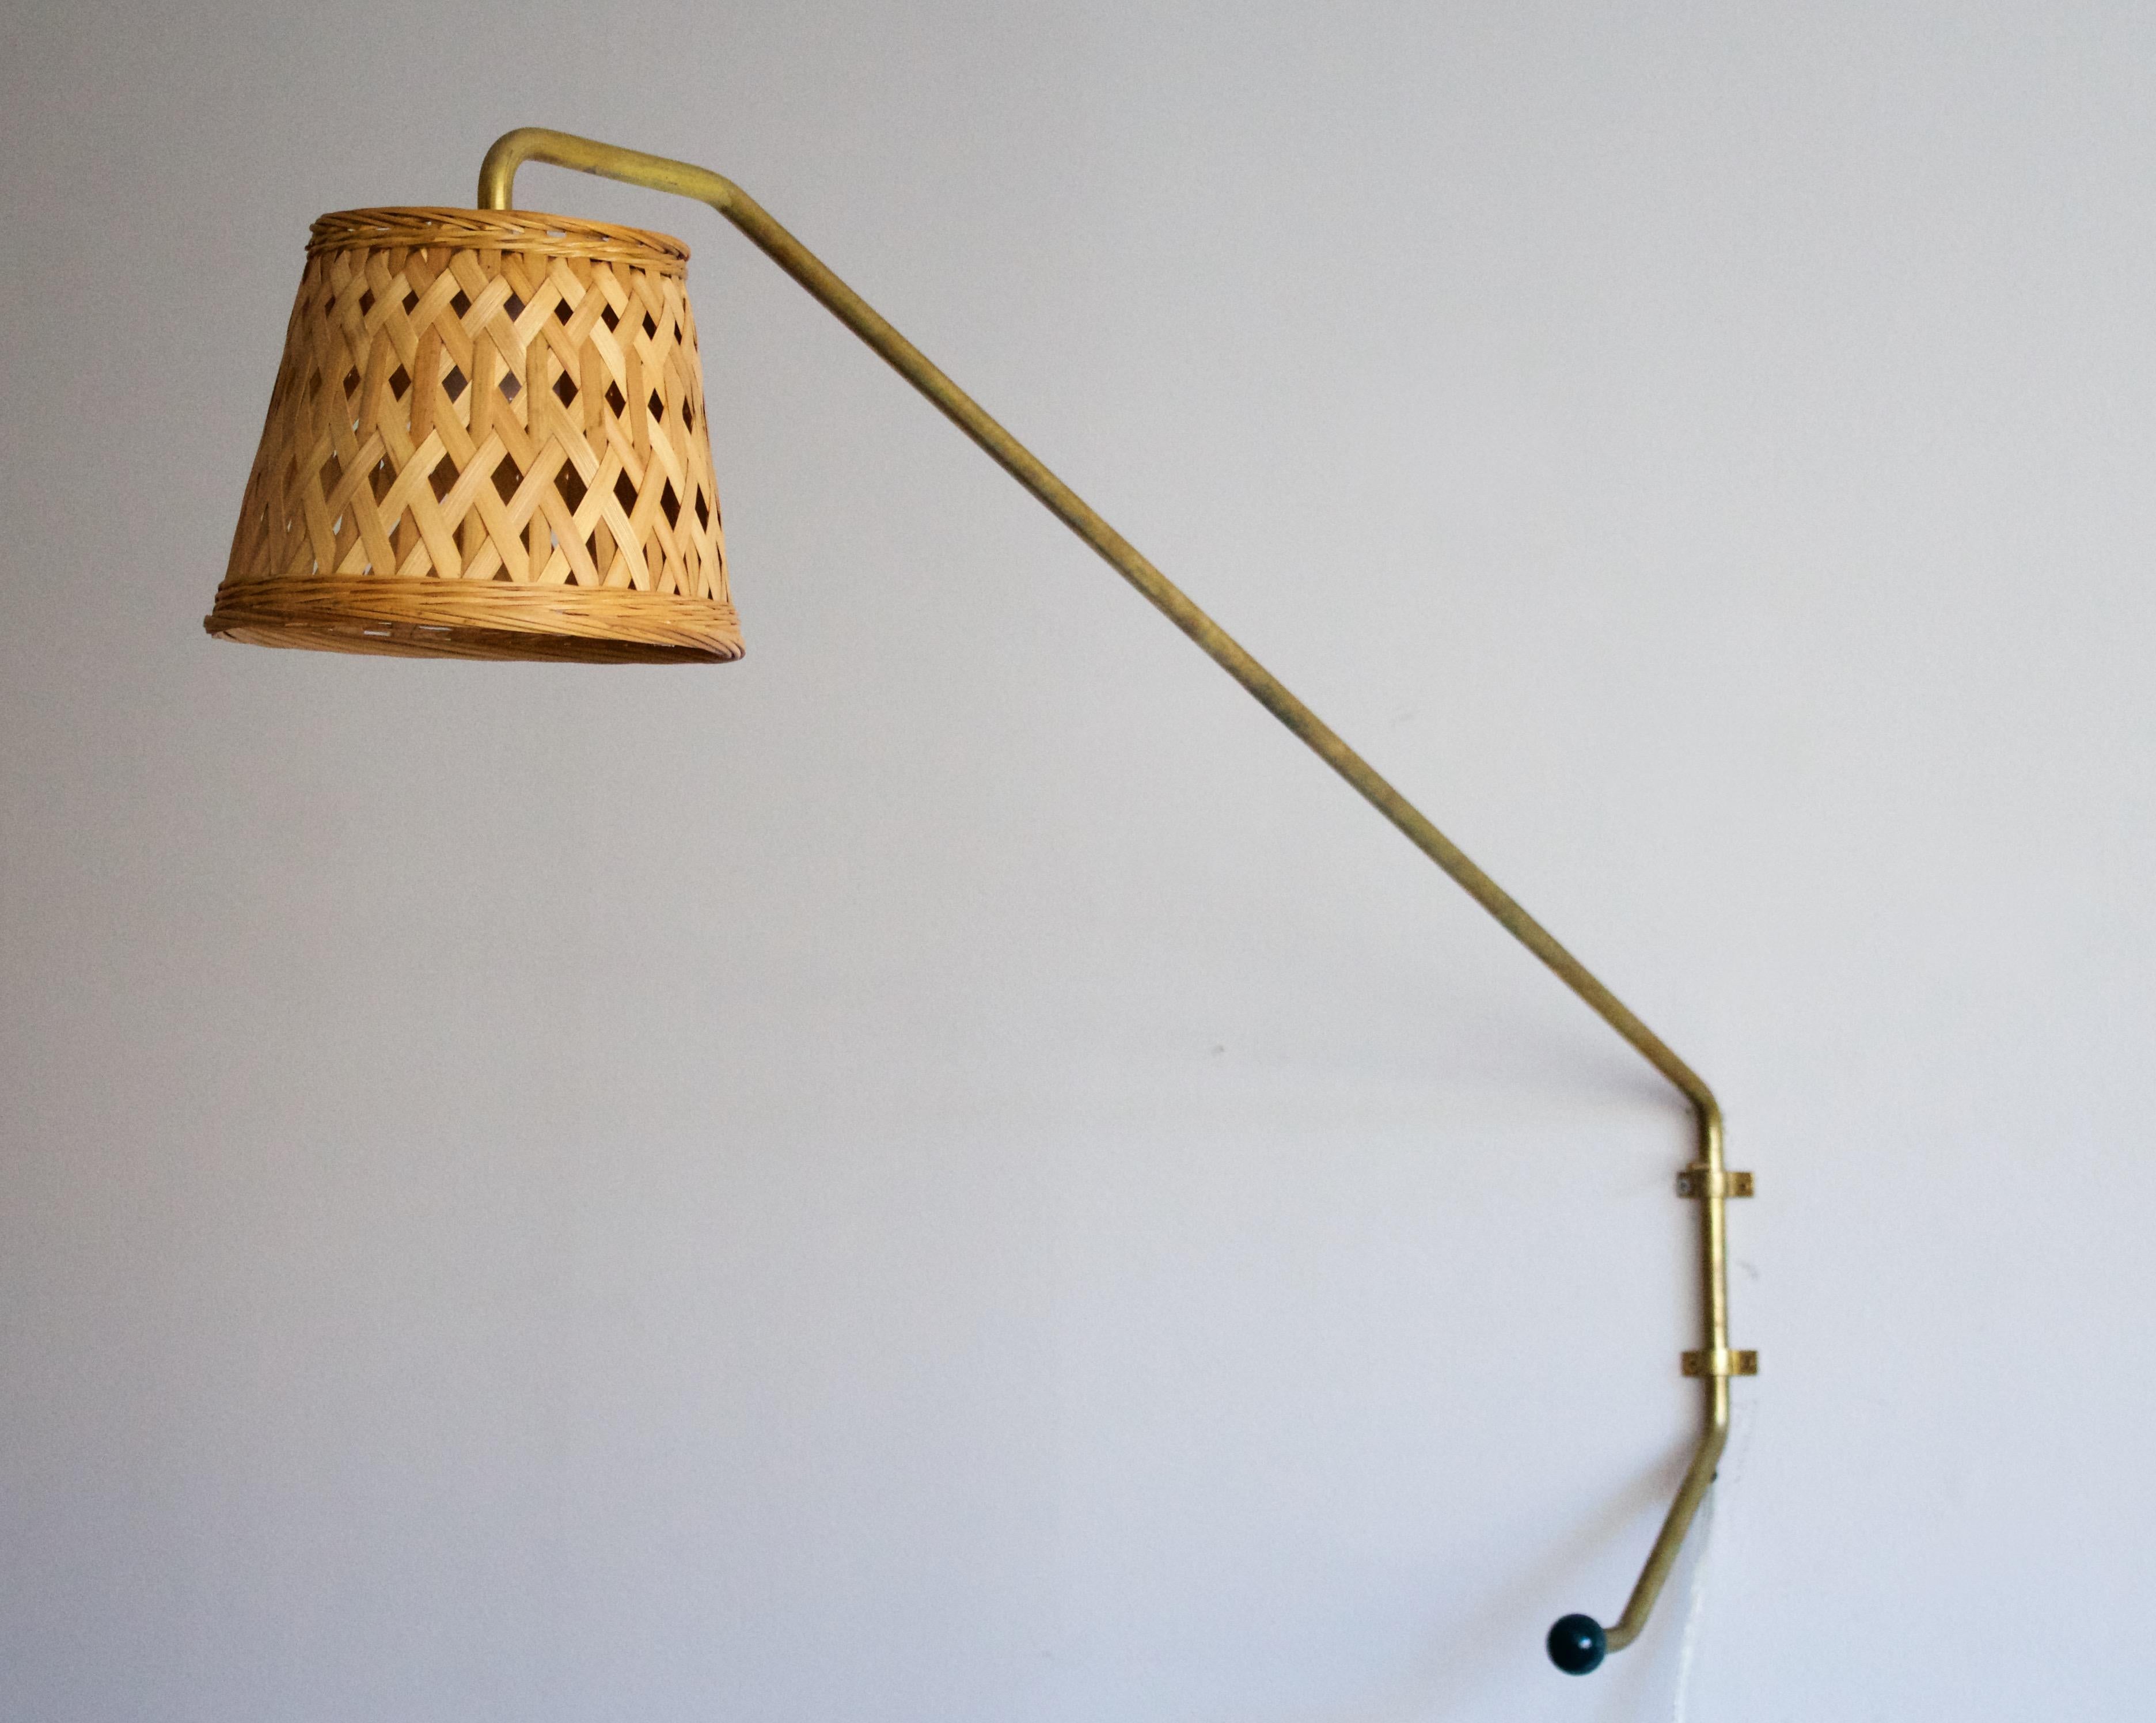 A pair of sizeable wall lights, designed and produced by Orsjö site specific for an Architecture Company head office, Sweden, 1980s. Labeled. Assorted vintage rattan lampshades.

Takes one lightbulb on E27 base. Max wattage of 60W, stated on